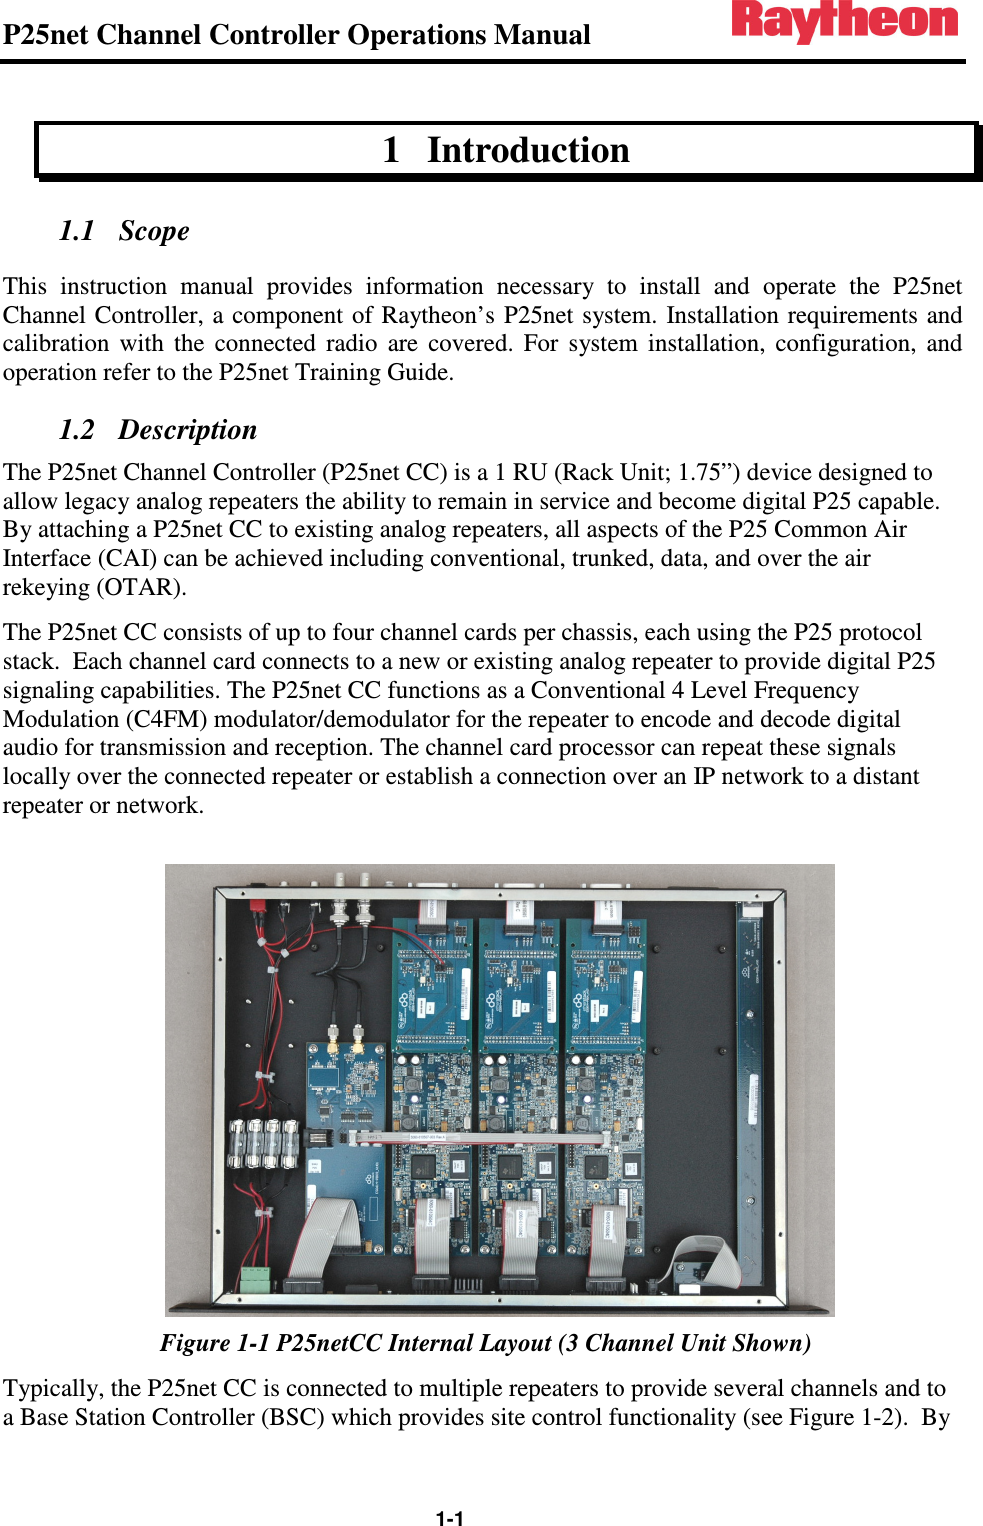 P25net Channel Controller Operations Manual                                                                                                   1-1 1 Introduction 1.1 Scope This  instruction  manual  provides  information  necessary  to  install  and  operate  the  P25net Channel Controller,  a  component of Raytheon’s P25net system. Installation  requirements  and calibration  with  the  connected  radio  are  covered.  For  system  installation,  configuration,  and operation refer to the P25net Training Guide. 1.2 Description The P25net Channel Controller (P25net CC) is a 1 RU (Rack Unit; 1.75”) device designed to allow legacy analog repeaters the ability to remain in service and become digital P25 capable.  By attaching a P25net CC to existing analog repeaters, all aspects of the P25 Common Air Interface (CAI) can be achieved including conventional, trunked, data, and over the air rekeying (OTAR). The P25net CC consists of up to four channel cards per chassis, each using the P25 protocol stack.  Each channel card connects to a new or existing analog repeater to provide digital P25 signaling capabilities. The P25net CC functions as a Conventional 4 Level Frequency Modulation (C4FM) modulator/demodulator for the repeater to encode and decode digital audio for transmission and reception. The channel card processor can repeat these signals locally over the connected repeater or establish a connection over an IP network to a distant repeater or network.   Figure 1-1 P25netCC Internal Layout (3 Channel Unit Shown) Typically, the P25net CC is connected to multiple repeaters to provide several channels and to a Base Station Controller (BSC) which provides site control functionality (see Figure 1-2).  By 